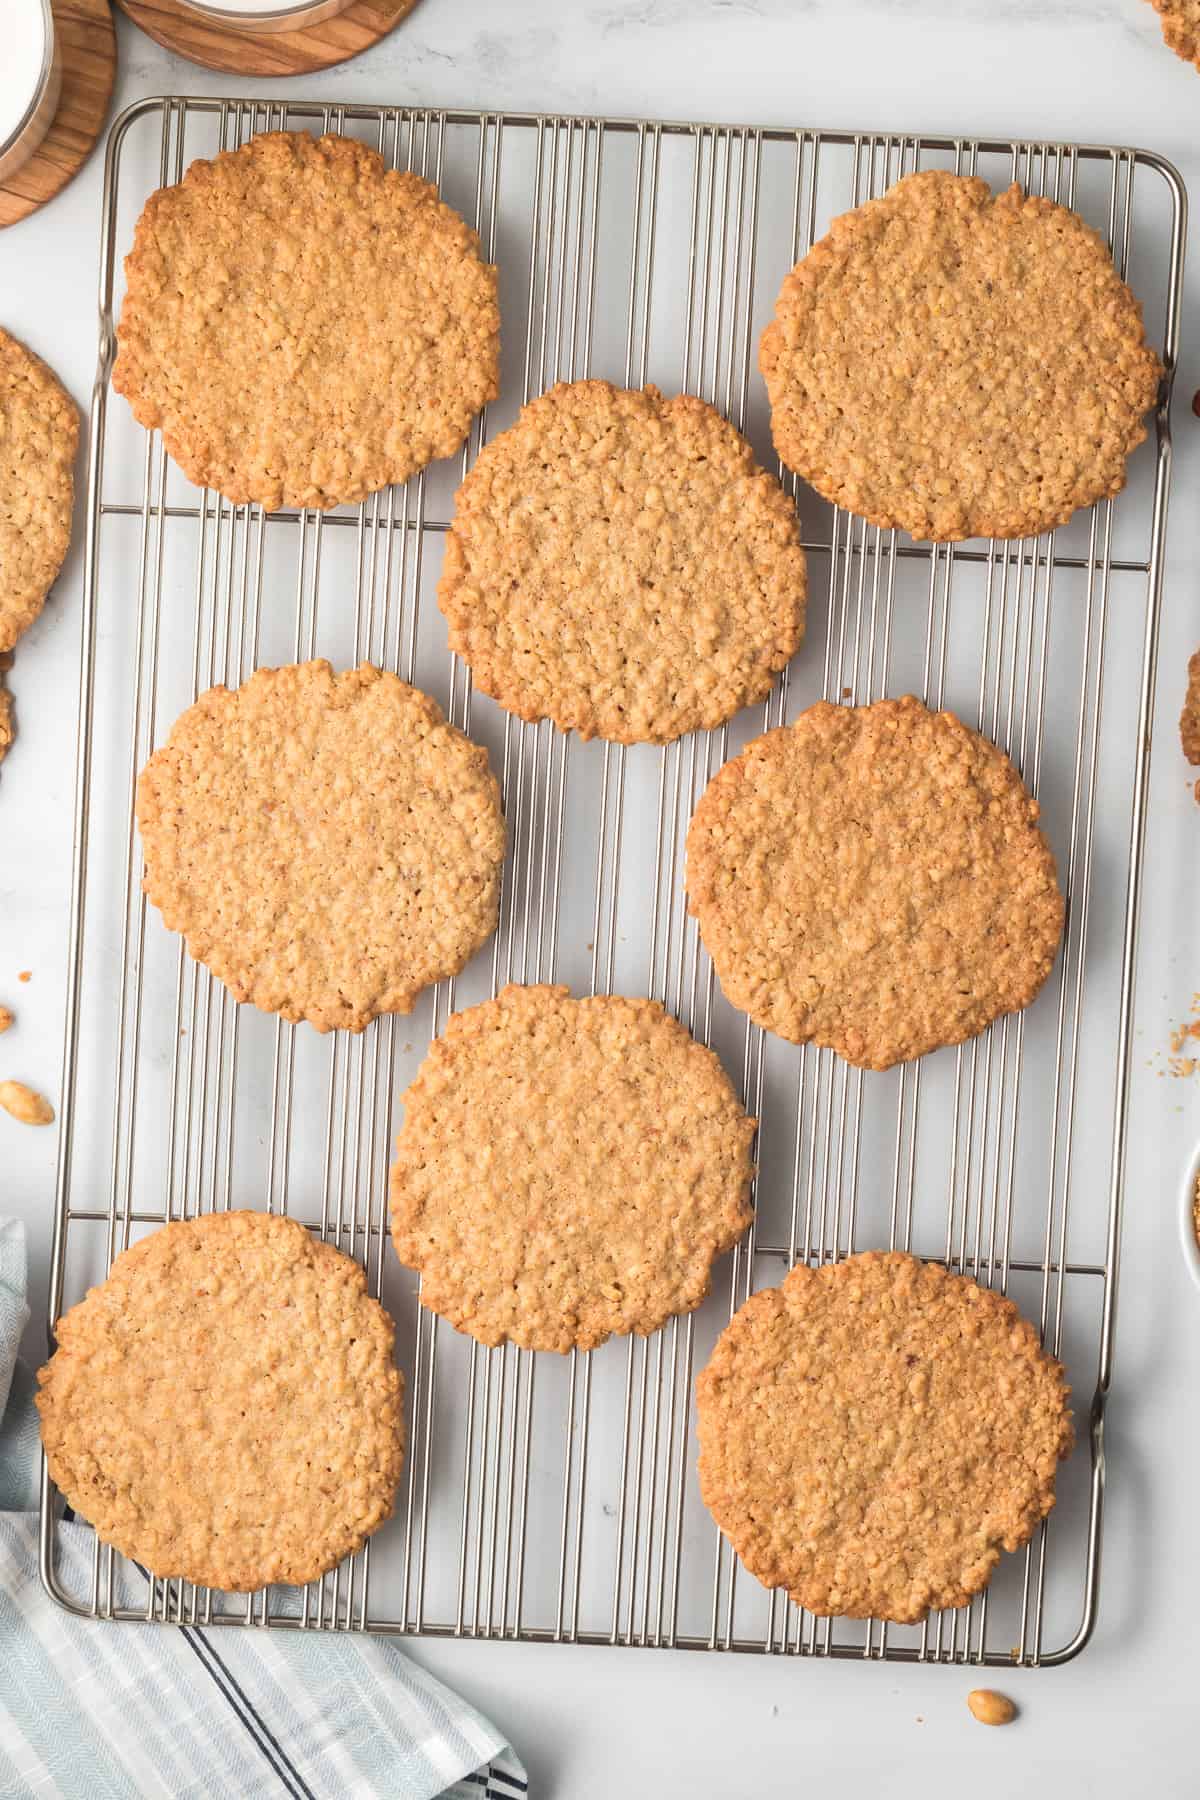 Crispy peanut cookies cooling on a wire rack.